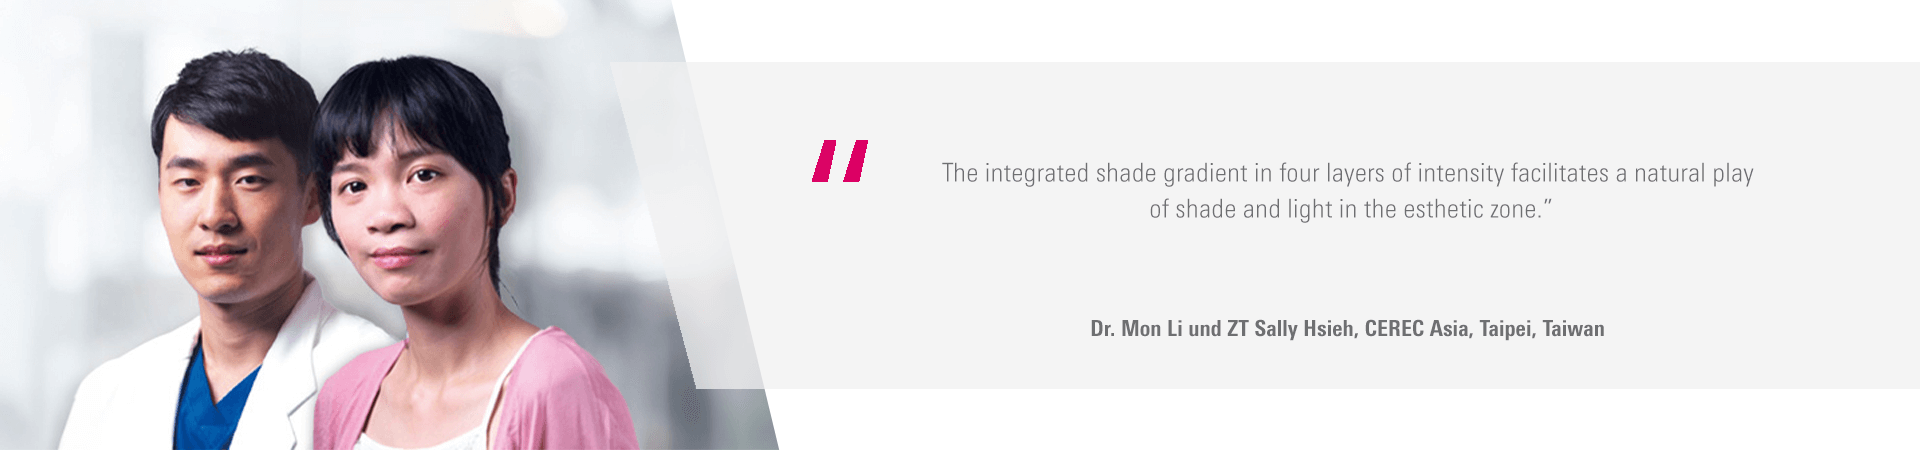 "The integrated shade gradient in four layers of intensity facilitates a natural play of shade and light in the esthetic zone." - Dr. Mon Li and Sally Hsieh, CEREC Asia, Taipei, Taiwan